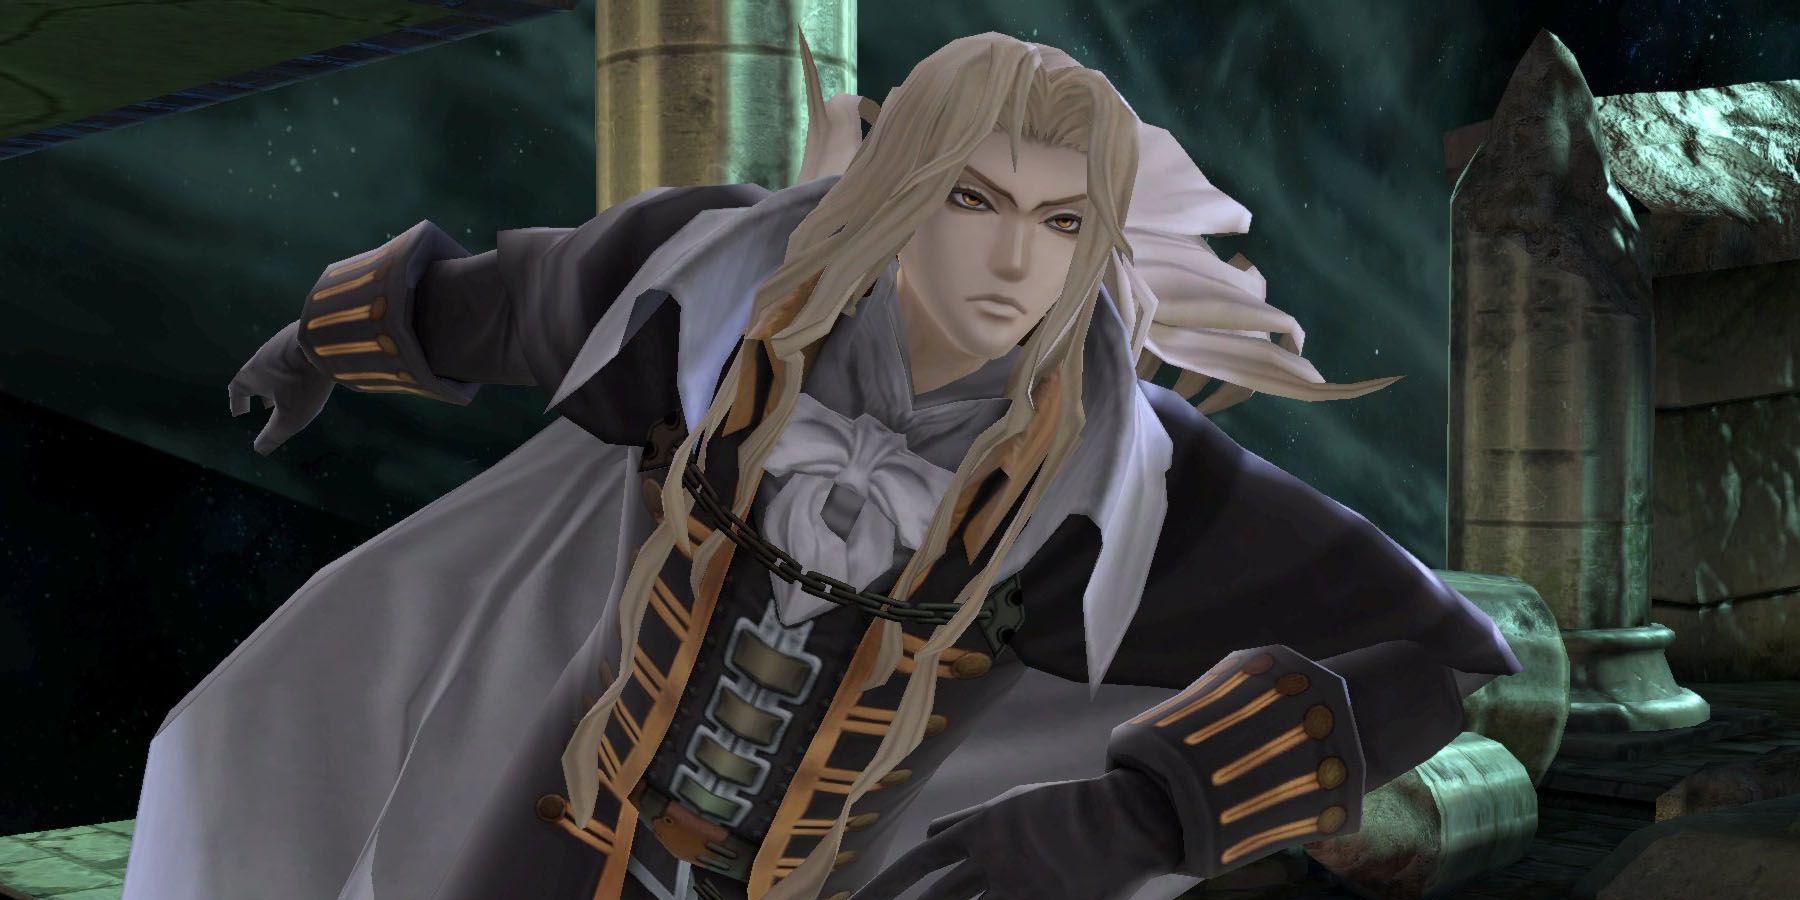 Gameplay revealed for Castlevania's Alucard ridiculously cool looking Super  Smash Bros. Ultimate mod